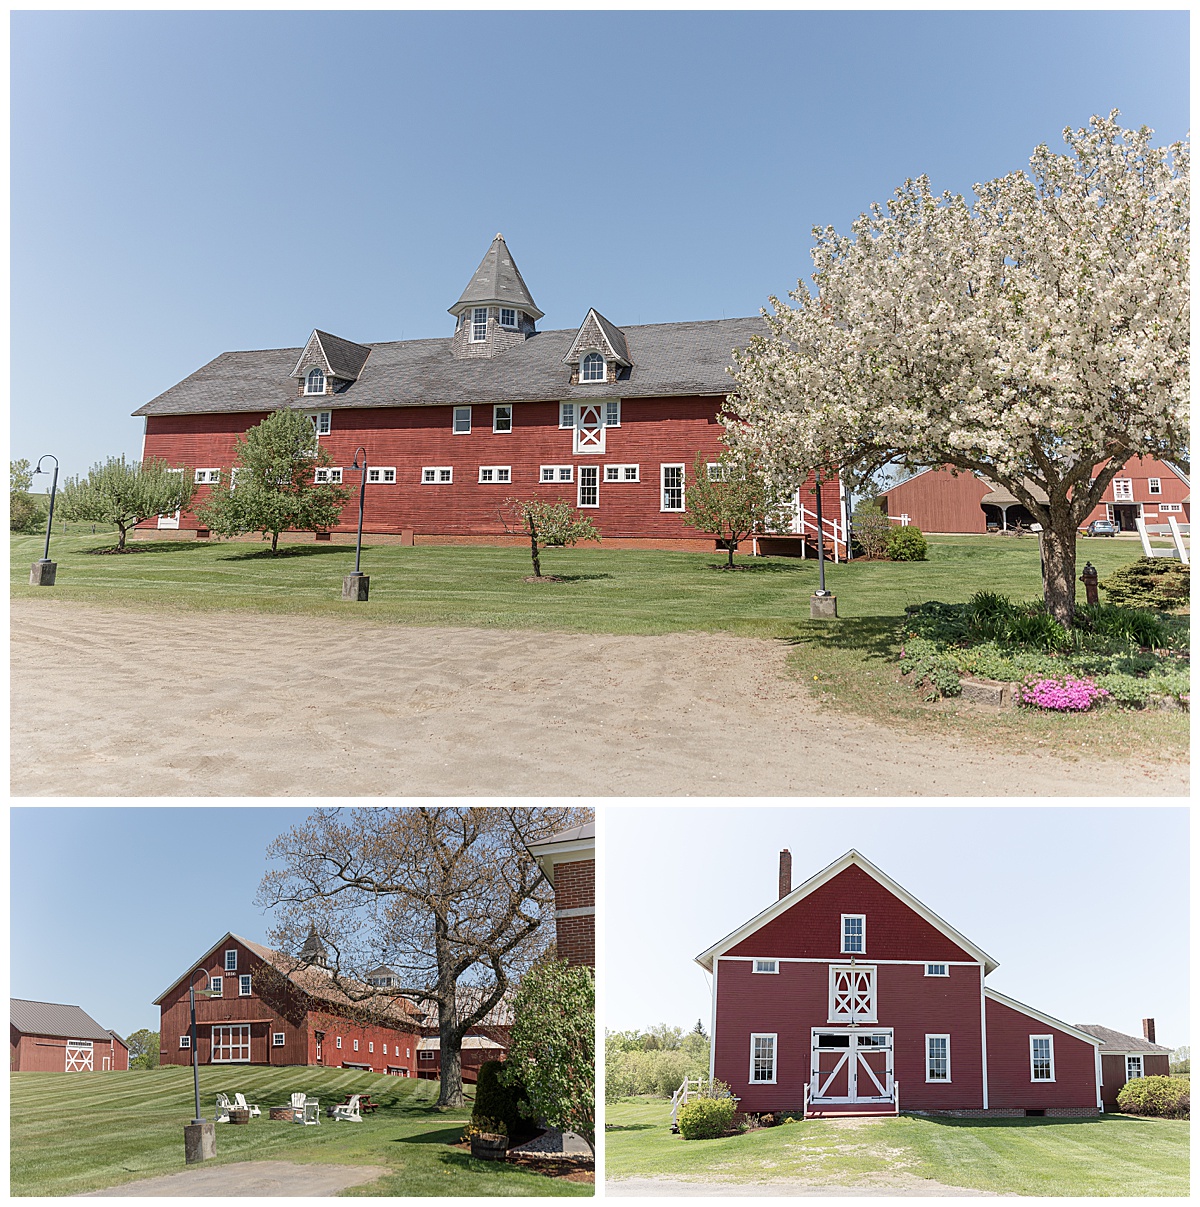 The Inn at Mountain View Farm in East Burke, Vermont is a quintessential New England farm featuring large red barns. 